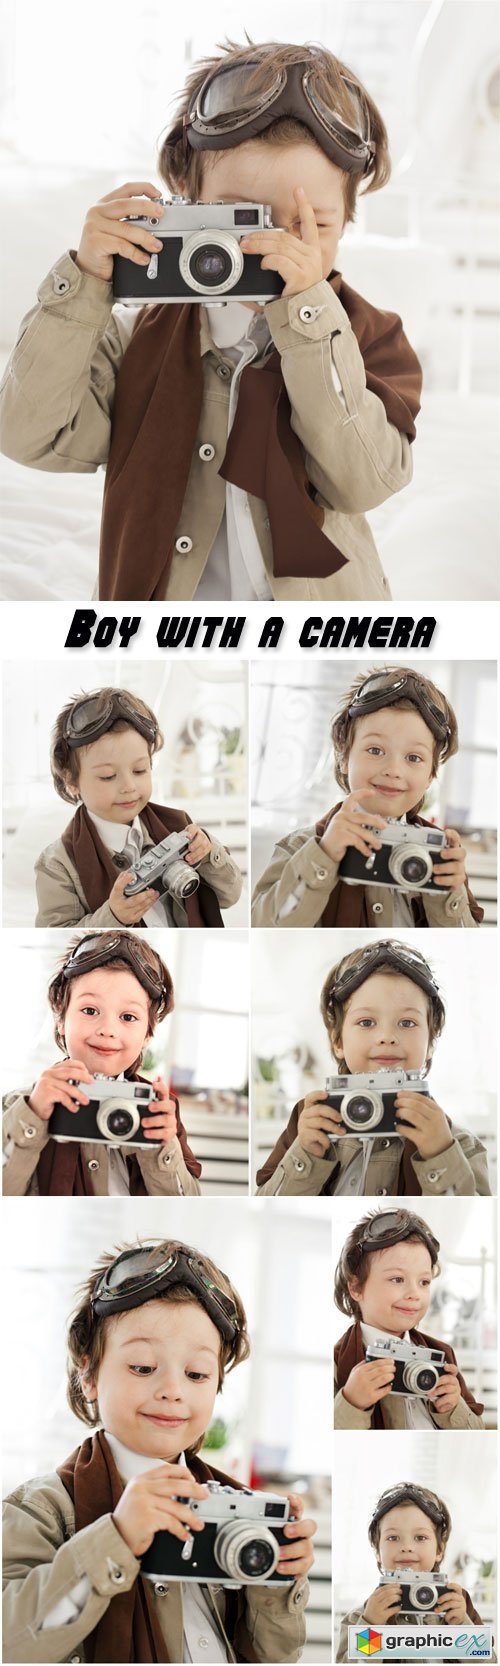 Little boy with a camera